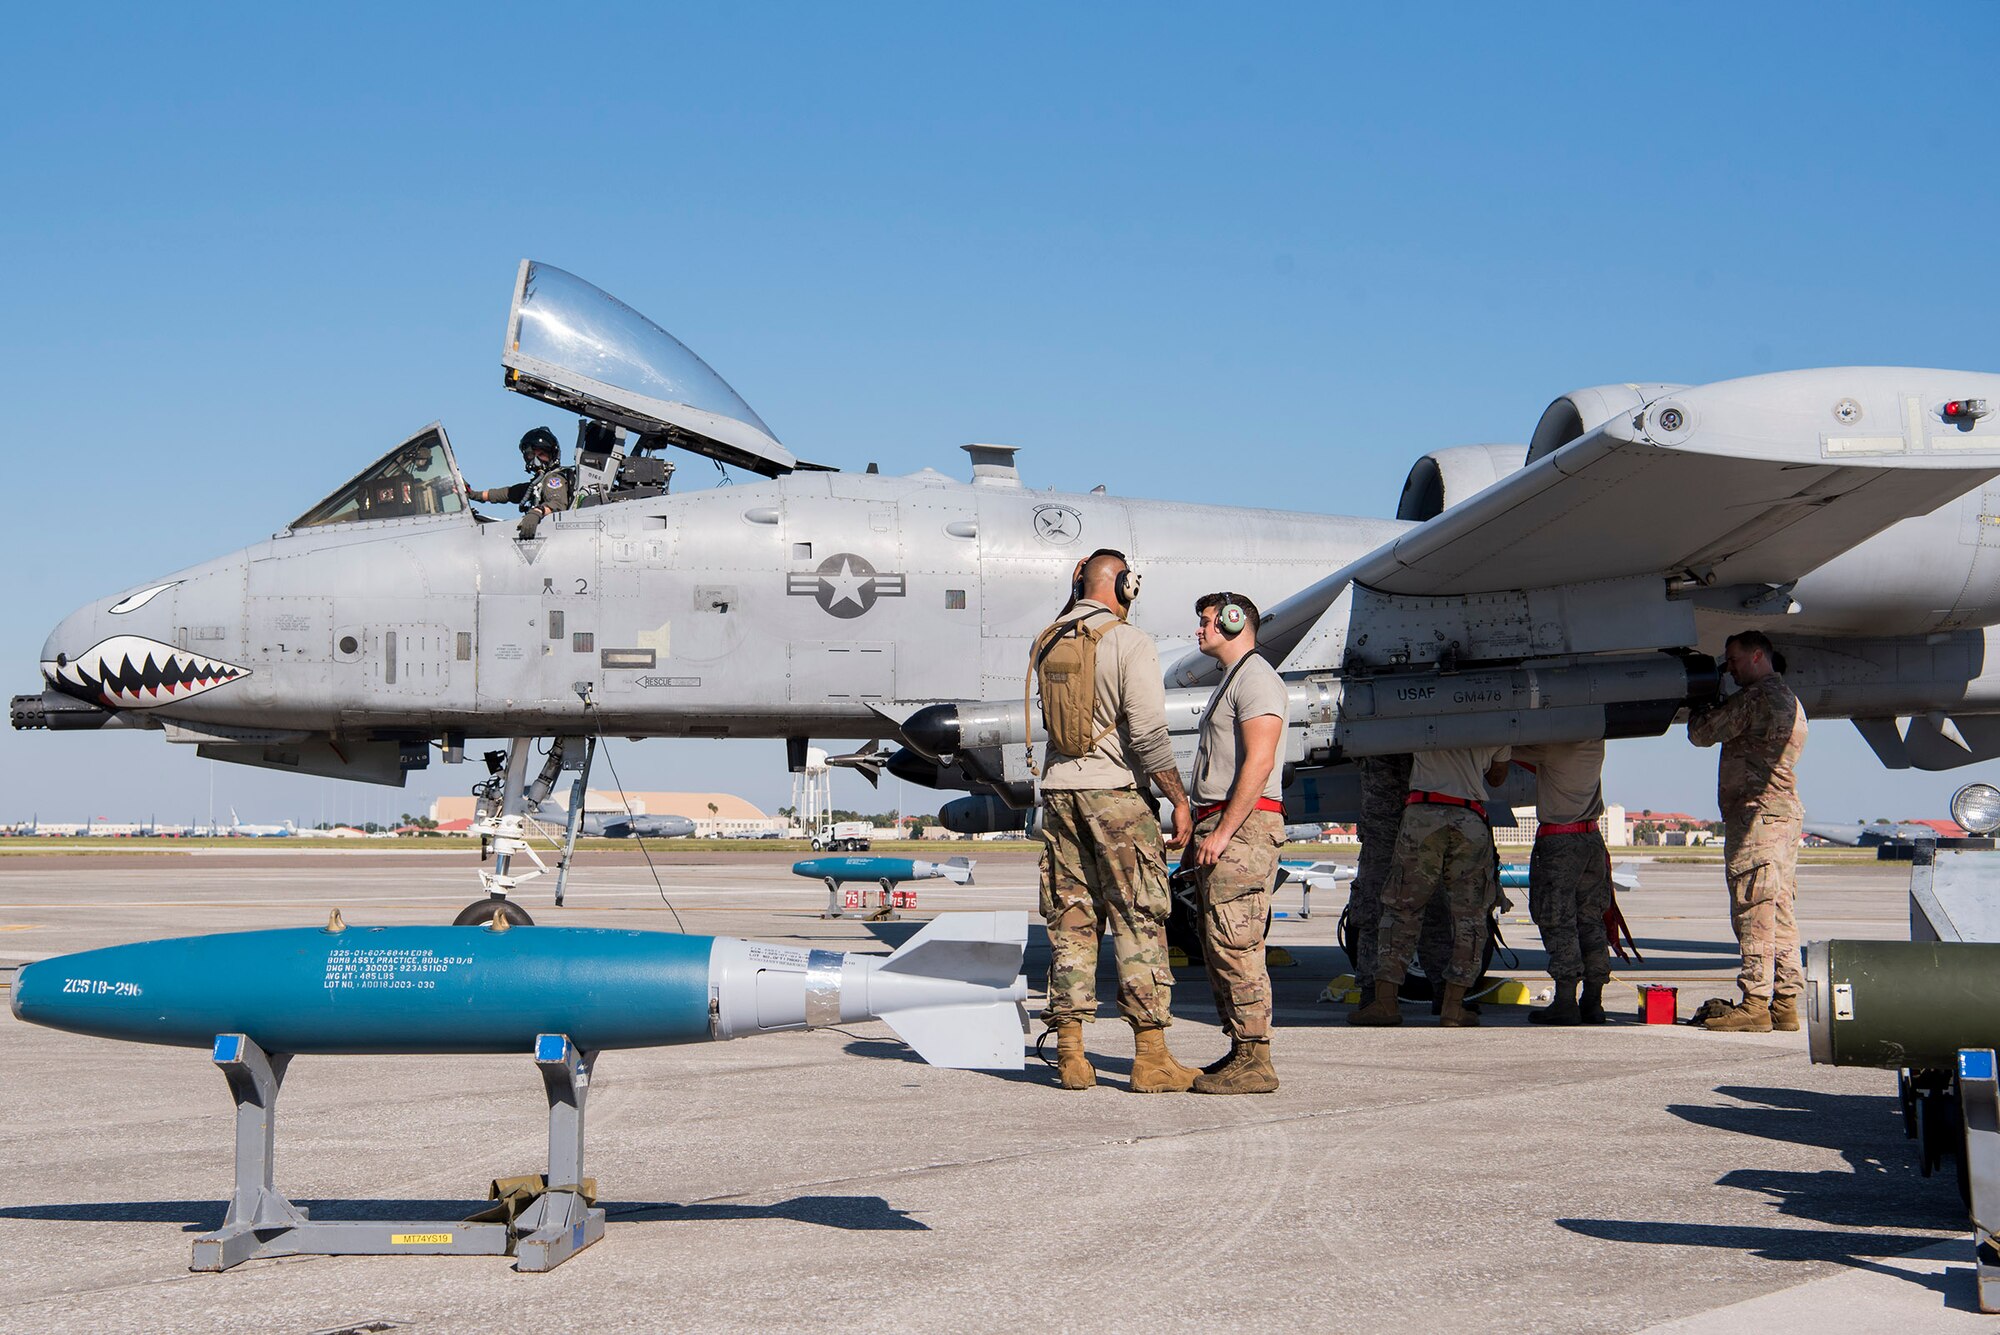 Airmen assigned to the 23rd Aircraft Maintenance Squadron, Moody Air Force Base, Ga., re-configure weapons on an A-10 Thunderbolt II assigned to the 74th Fighter Squadron Moody AFB for Exercise Mobil Tiger Nov. 19, 2019 on MacDill Air Force Base, Fla.